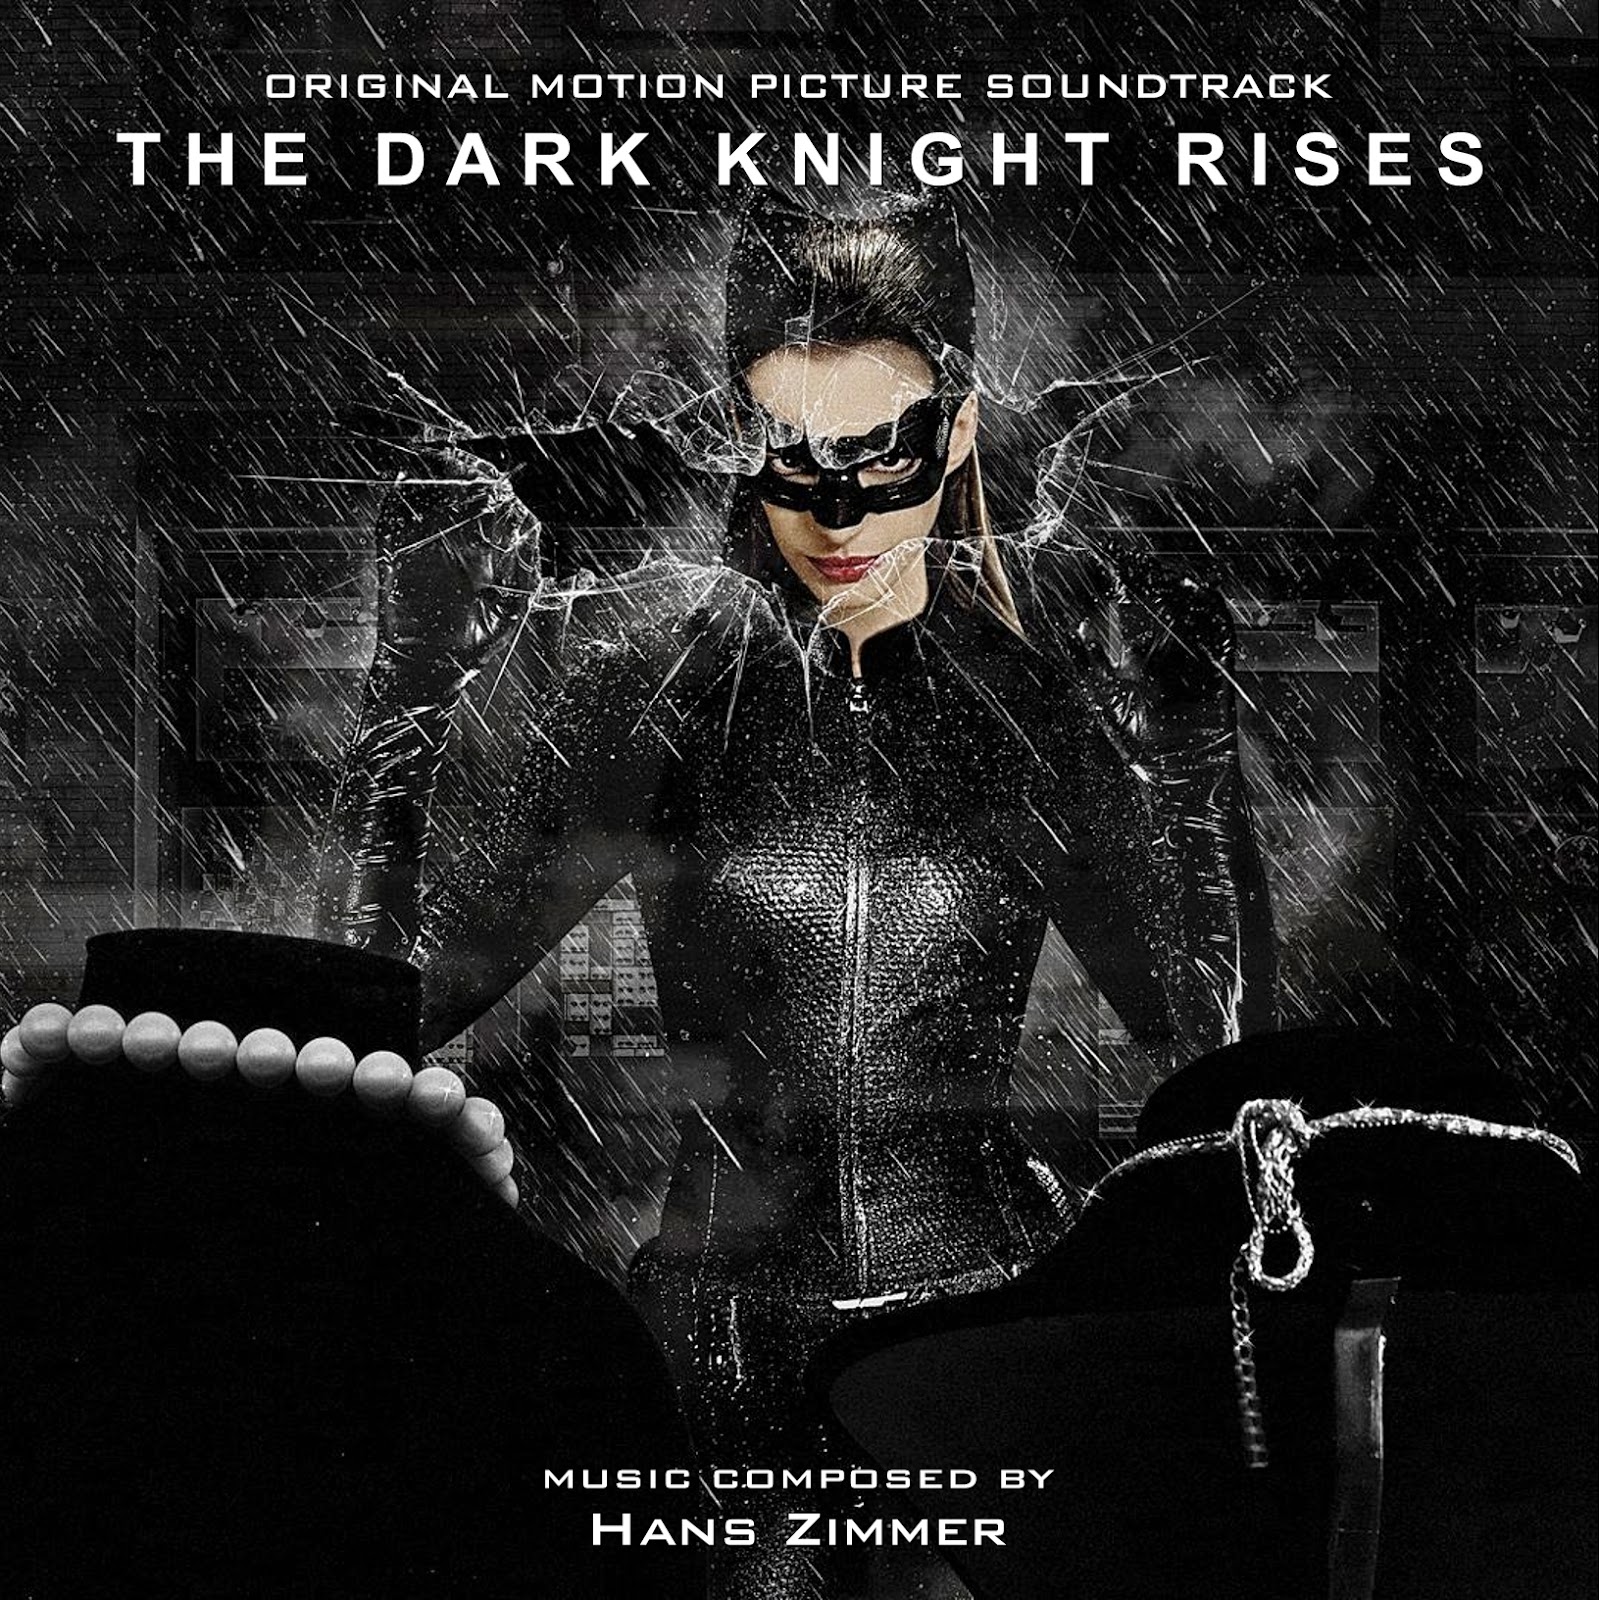 LE BLOG DE CHIEF DUNDEE: THE DARK KNIGHT RISES Complete Score - Hans Zimmer